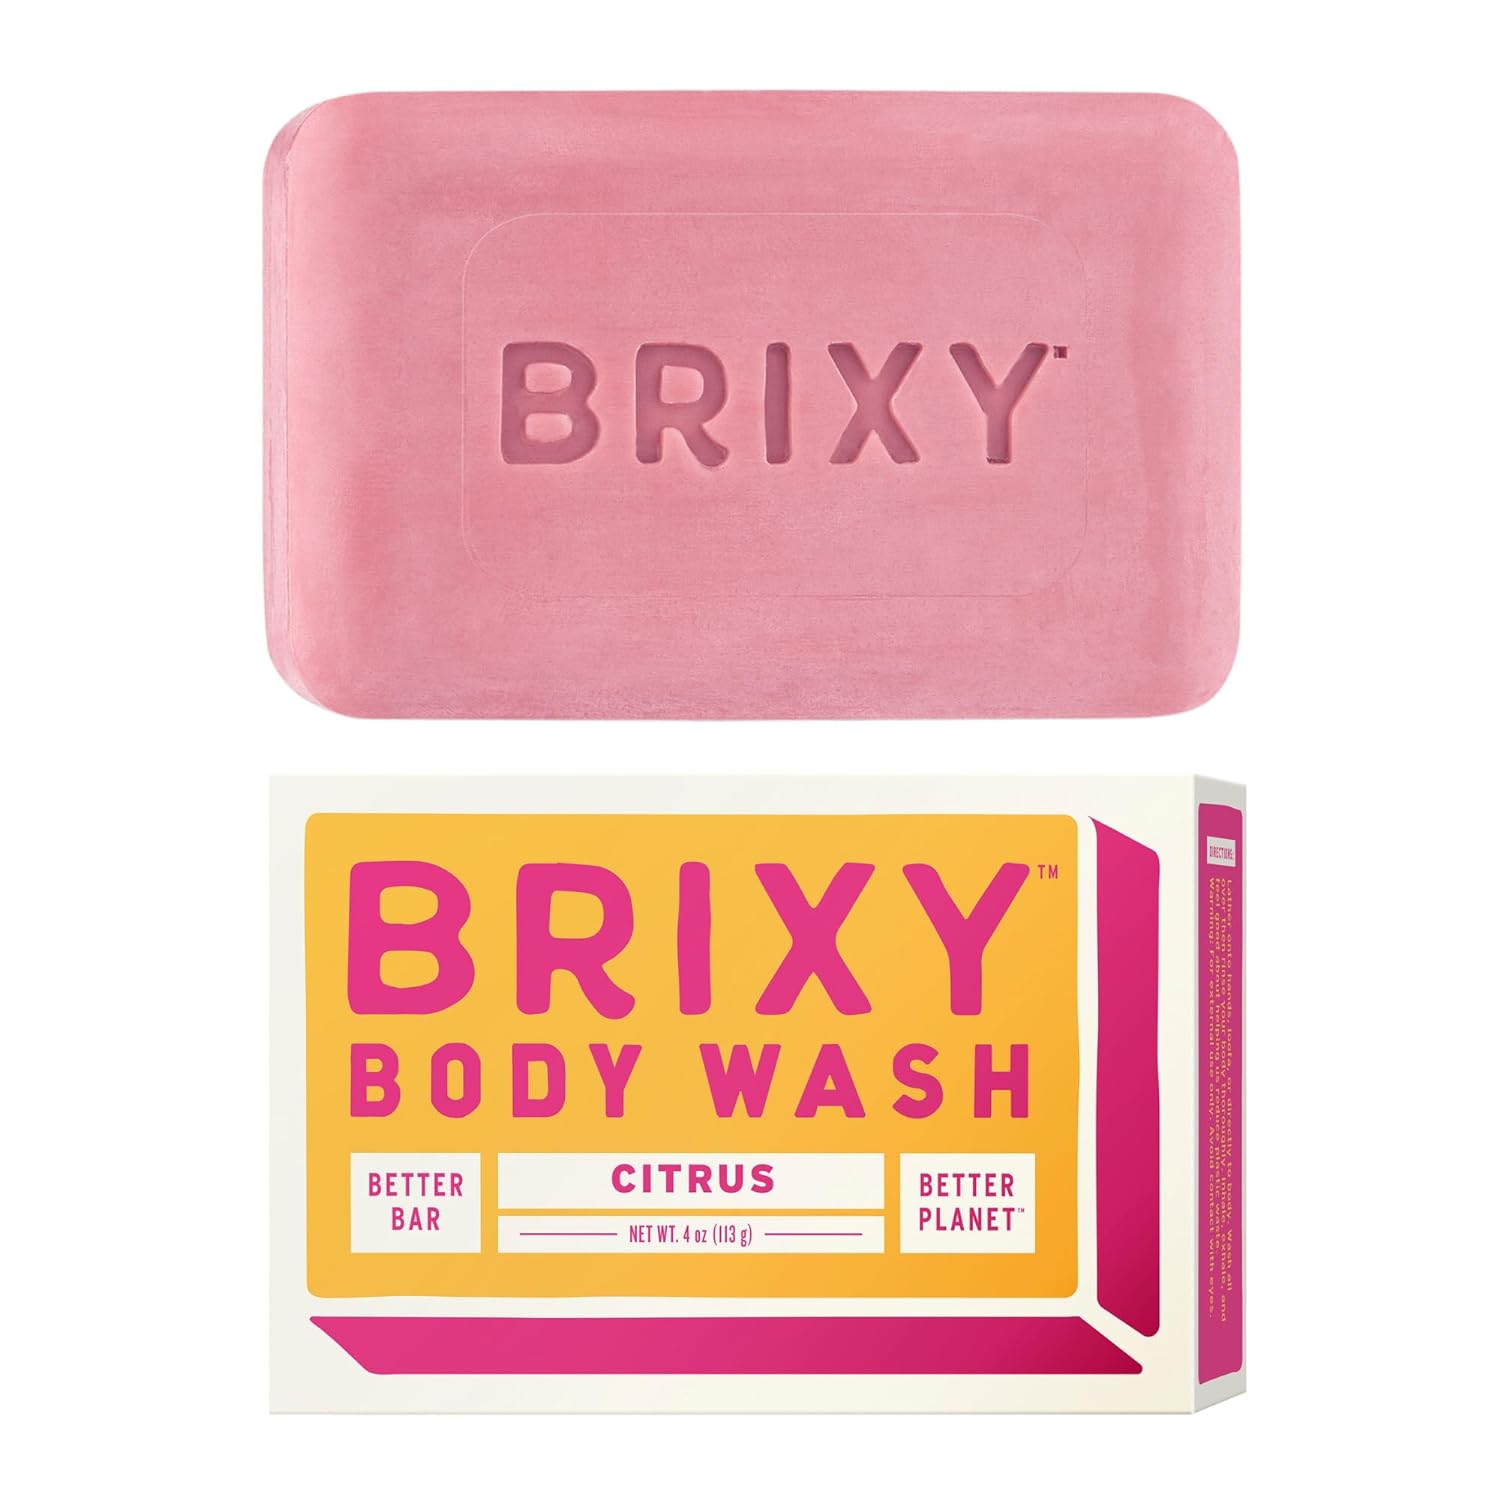 BRIXY Body Wash Bar to Moisturize & Soften, All Skin Types Including Sensitive Skin, Sustainable, Vegan, Plastic Free (pack of 1, 4 bar)